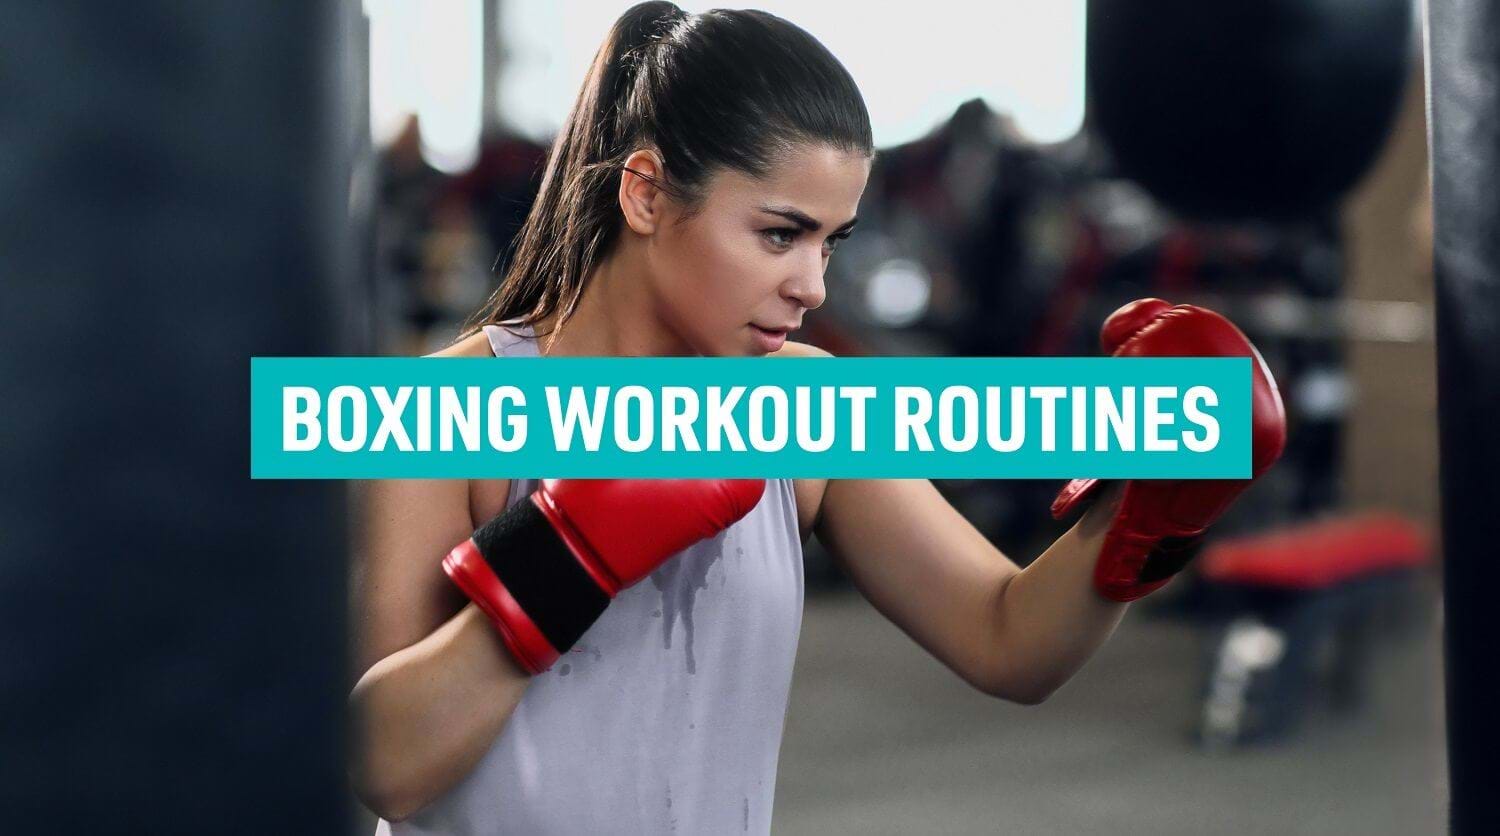 20-Minute At-Home Boxing Workout Without Equipment